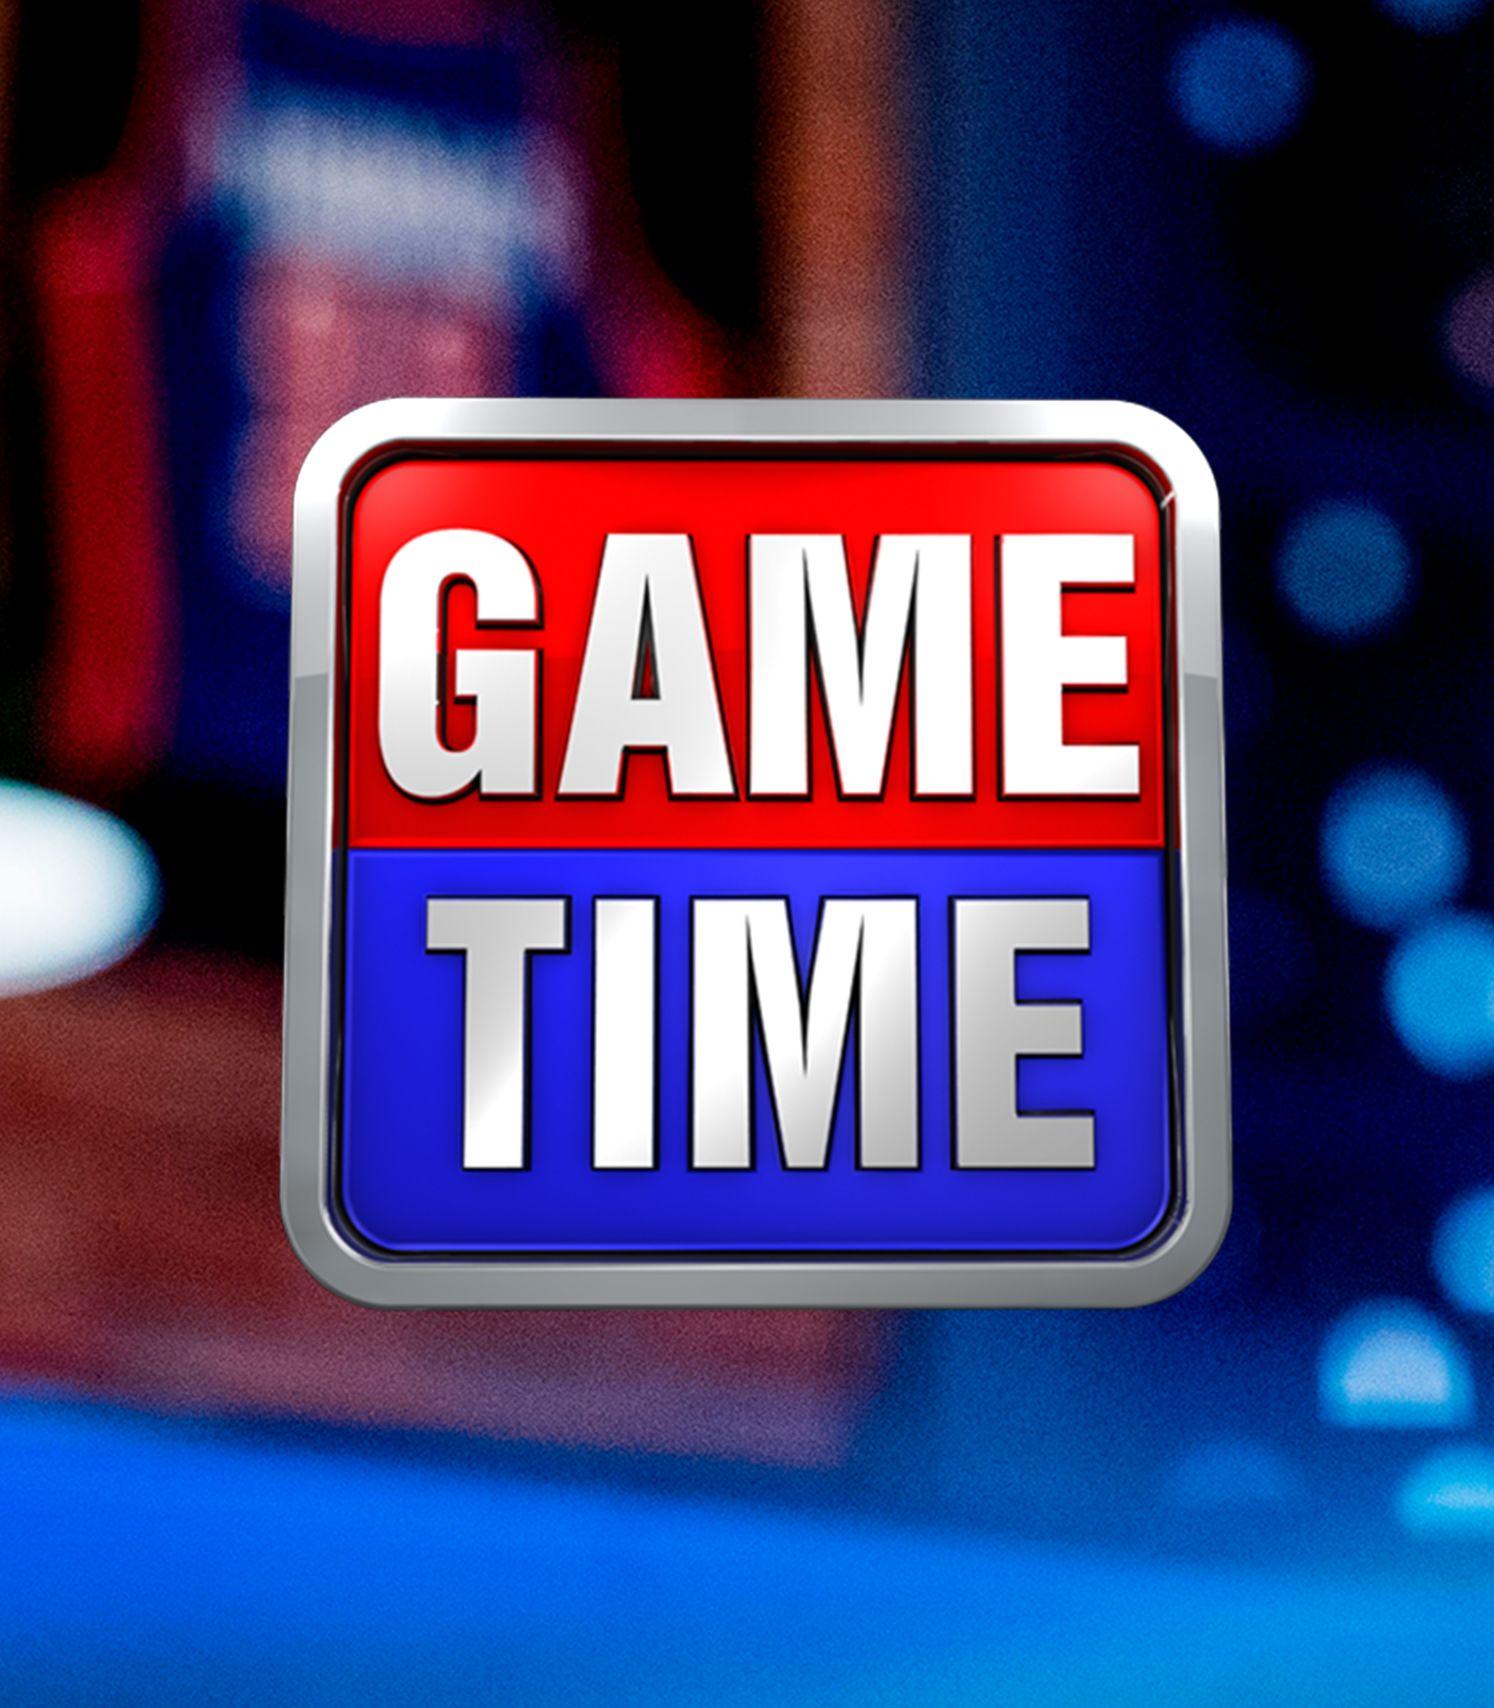 Game time. Game time игра. Gametime картинки. Gaming time logo. Game time перевод